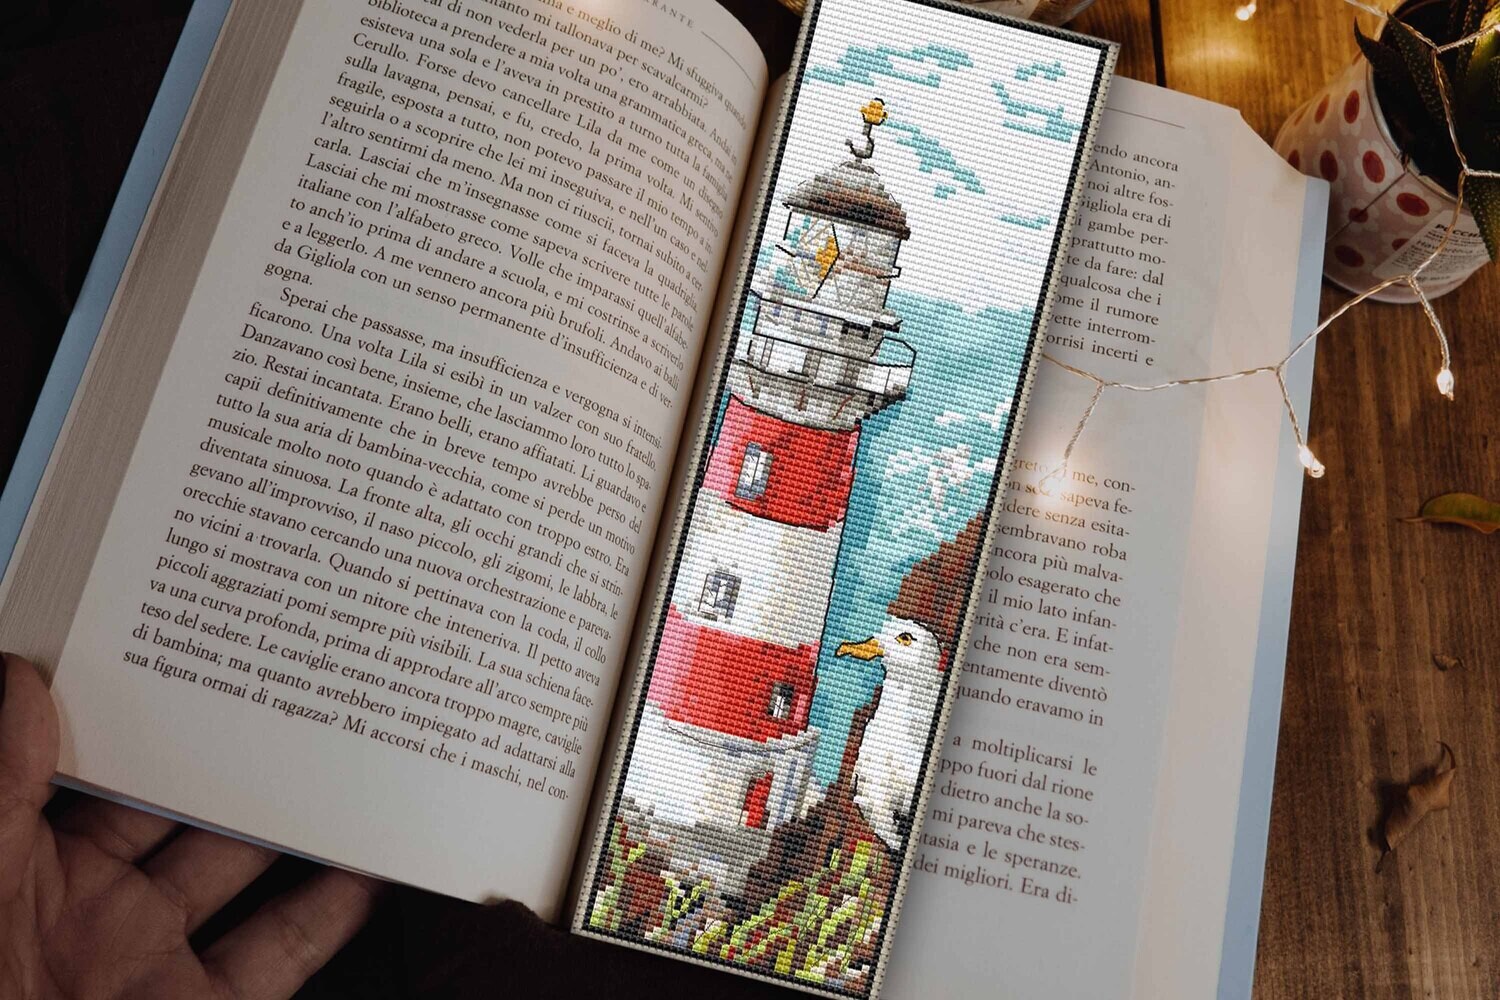 Lighthouse bookmark cross stitch pattern PDF,Bookworm teacher gift, Follow your dreams, Nautical ocean lover gift for men Digital download, Custom counted cross stitch chart, Sea bookmarks, Handmade D